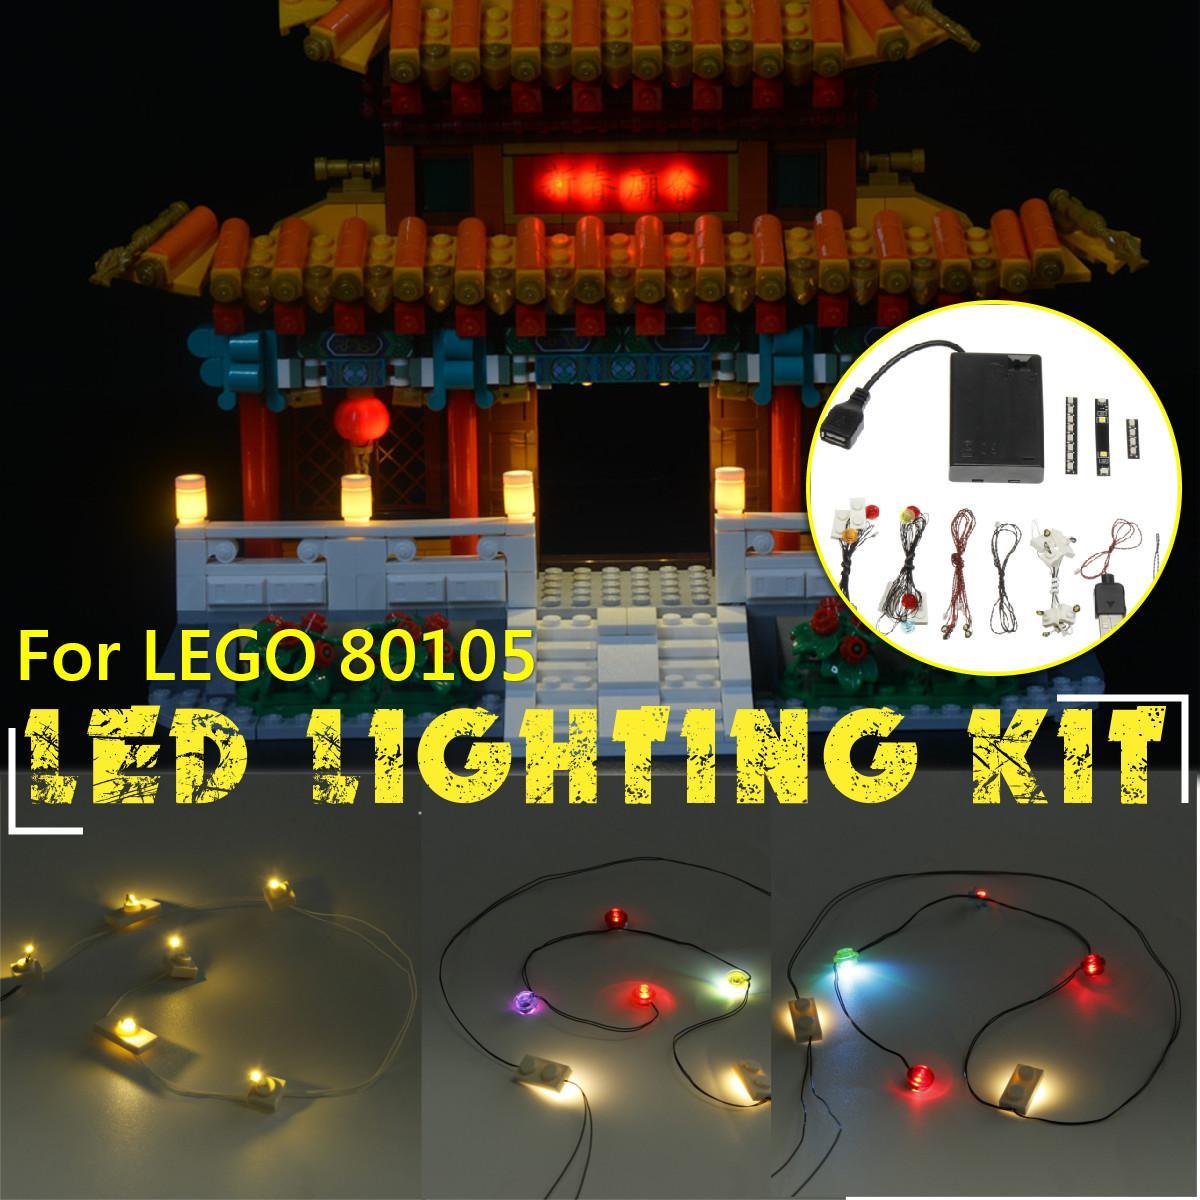 DIY LED Light Kit For LEGO 80105 Chinese New Year Temple Fair 80105 Lighting Building